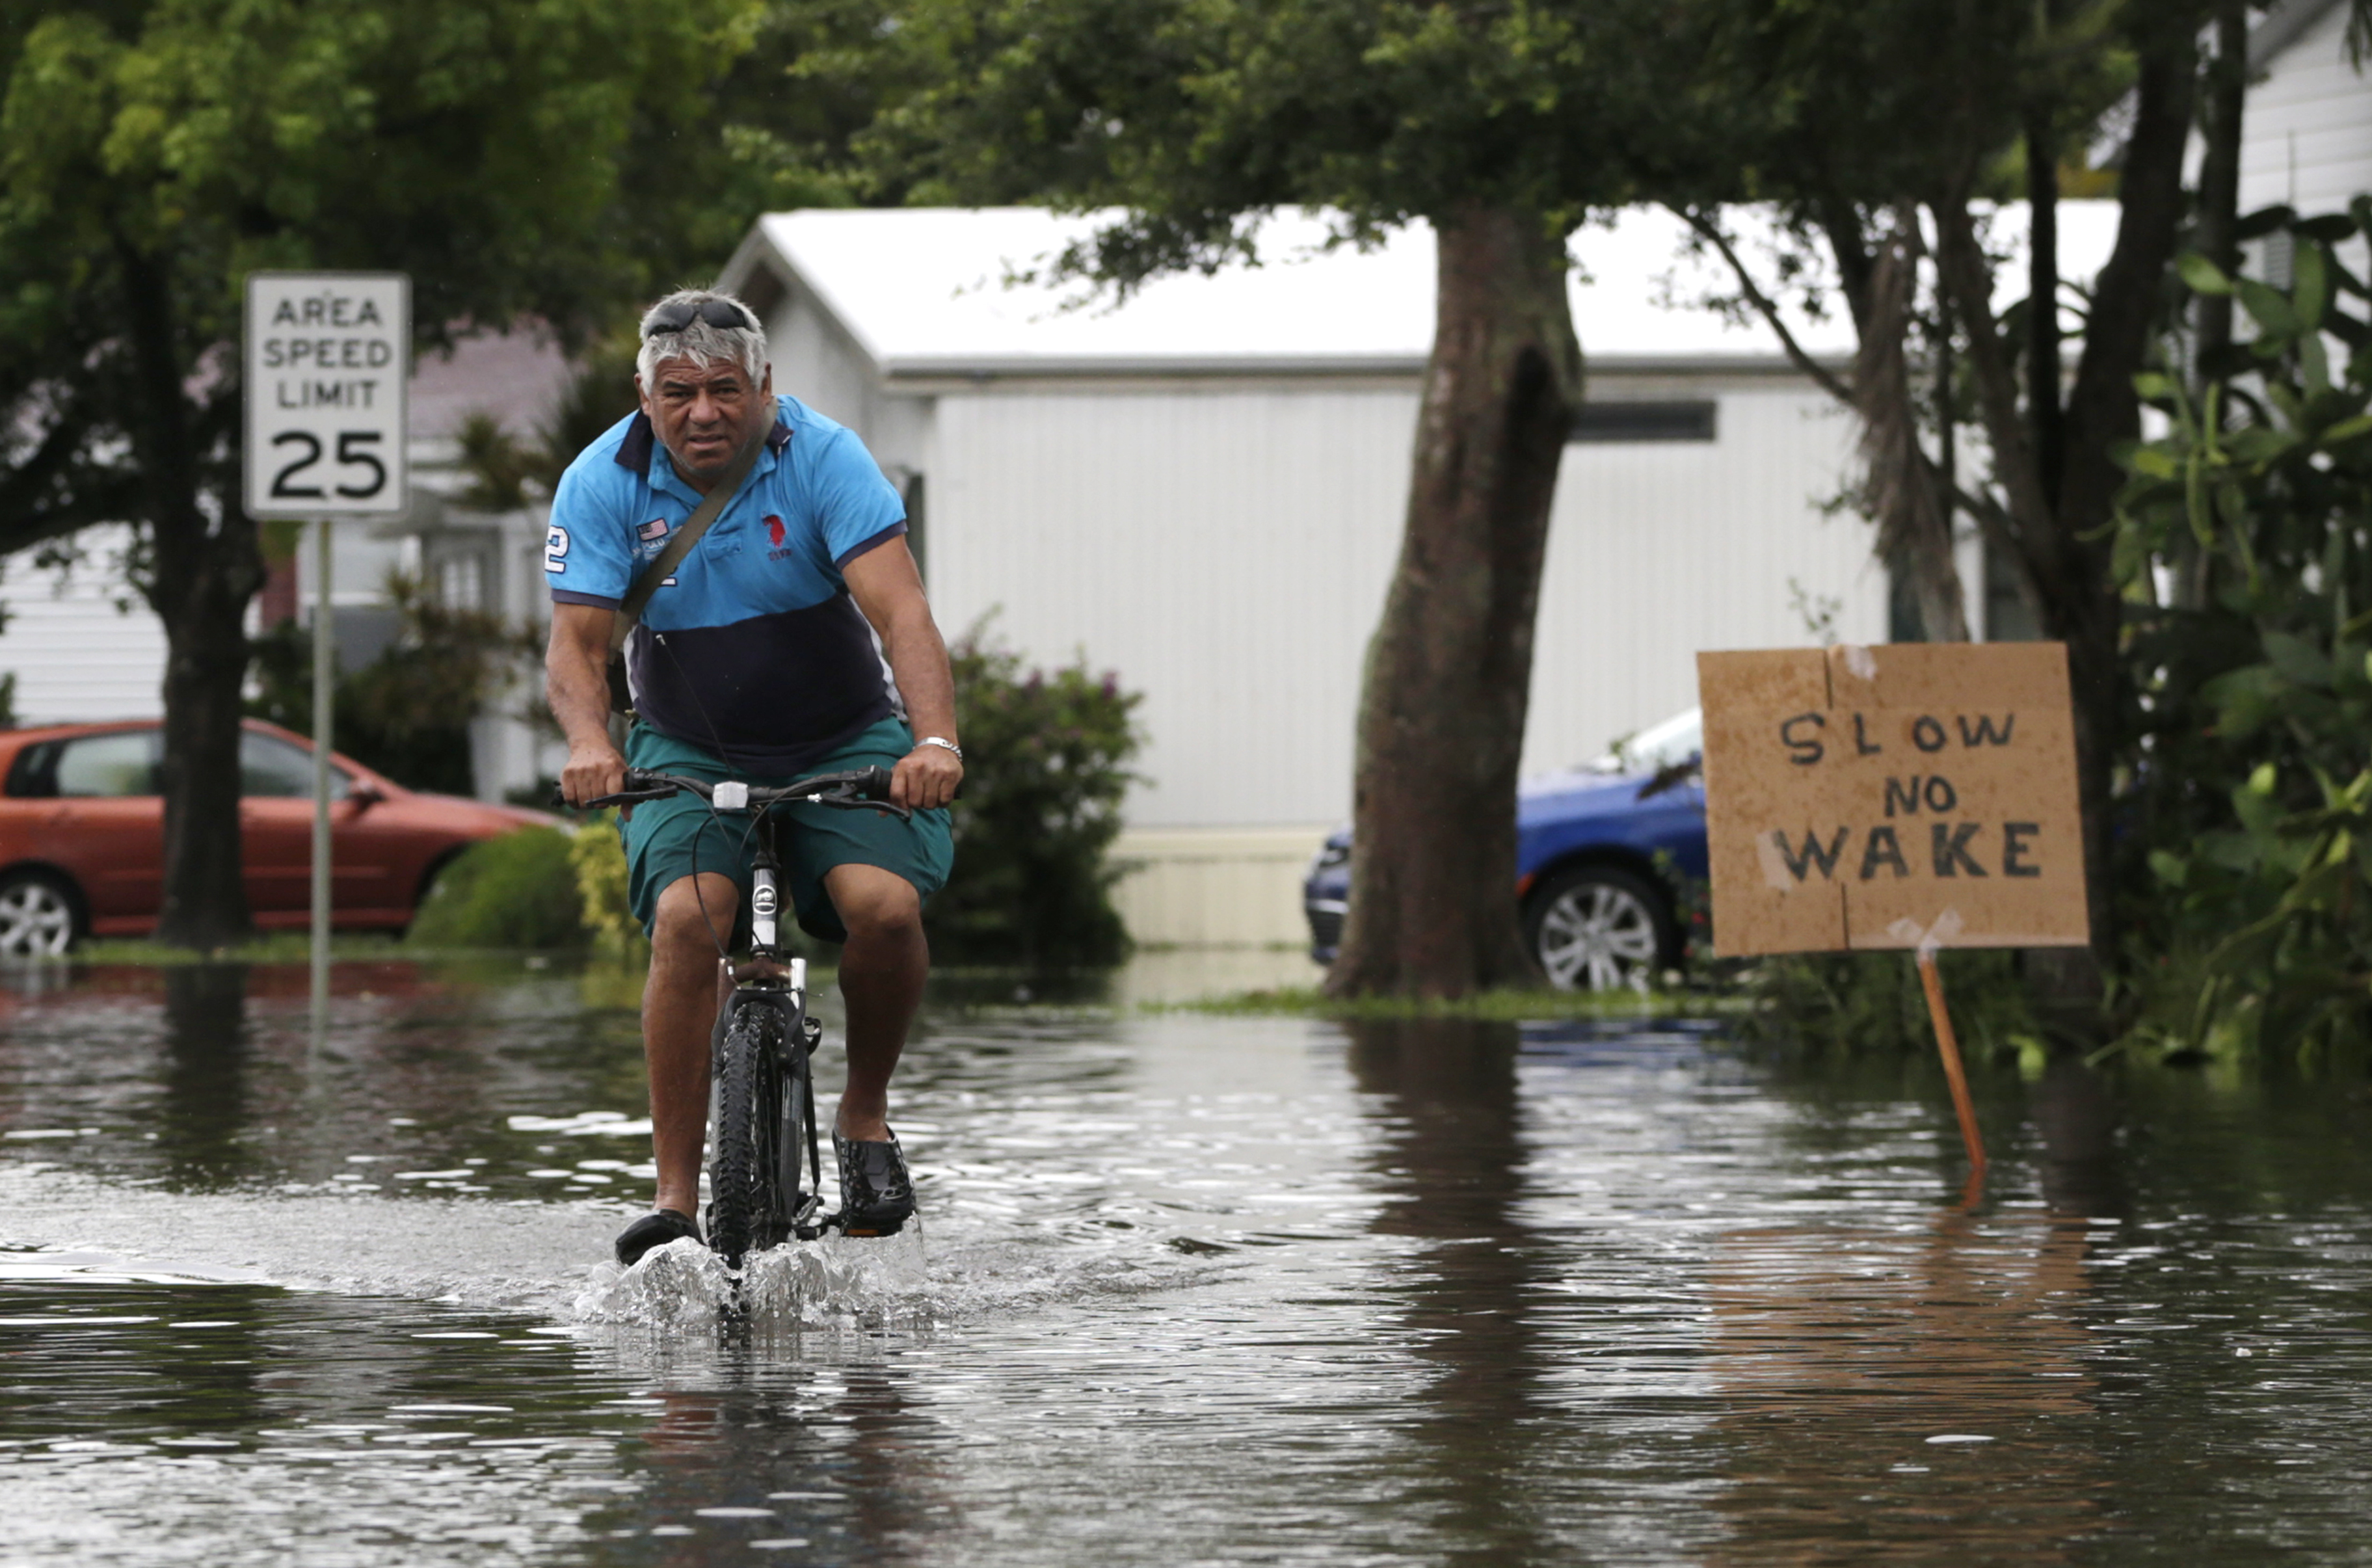 Dario Pavan rides his bicycle through flooded streets in the Sunshine Village mobile home park, Wednesday, June 7, 2017, in Davie, Fla. Several South Florida cities set rainfall records as heavy rain continues to fall, bringing the potential for further flooding. (AP Photo/Lynne Sladky)